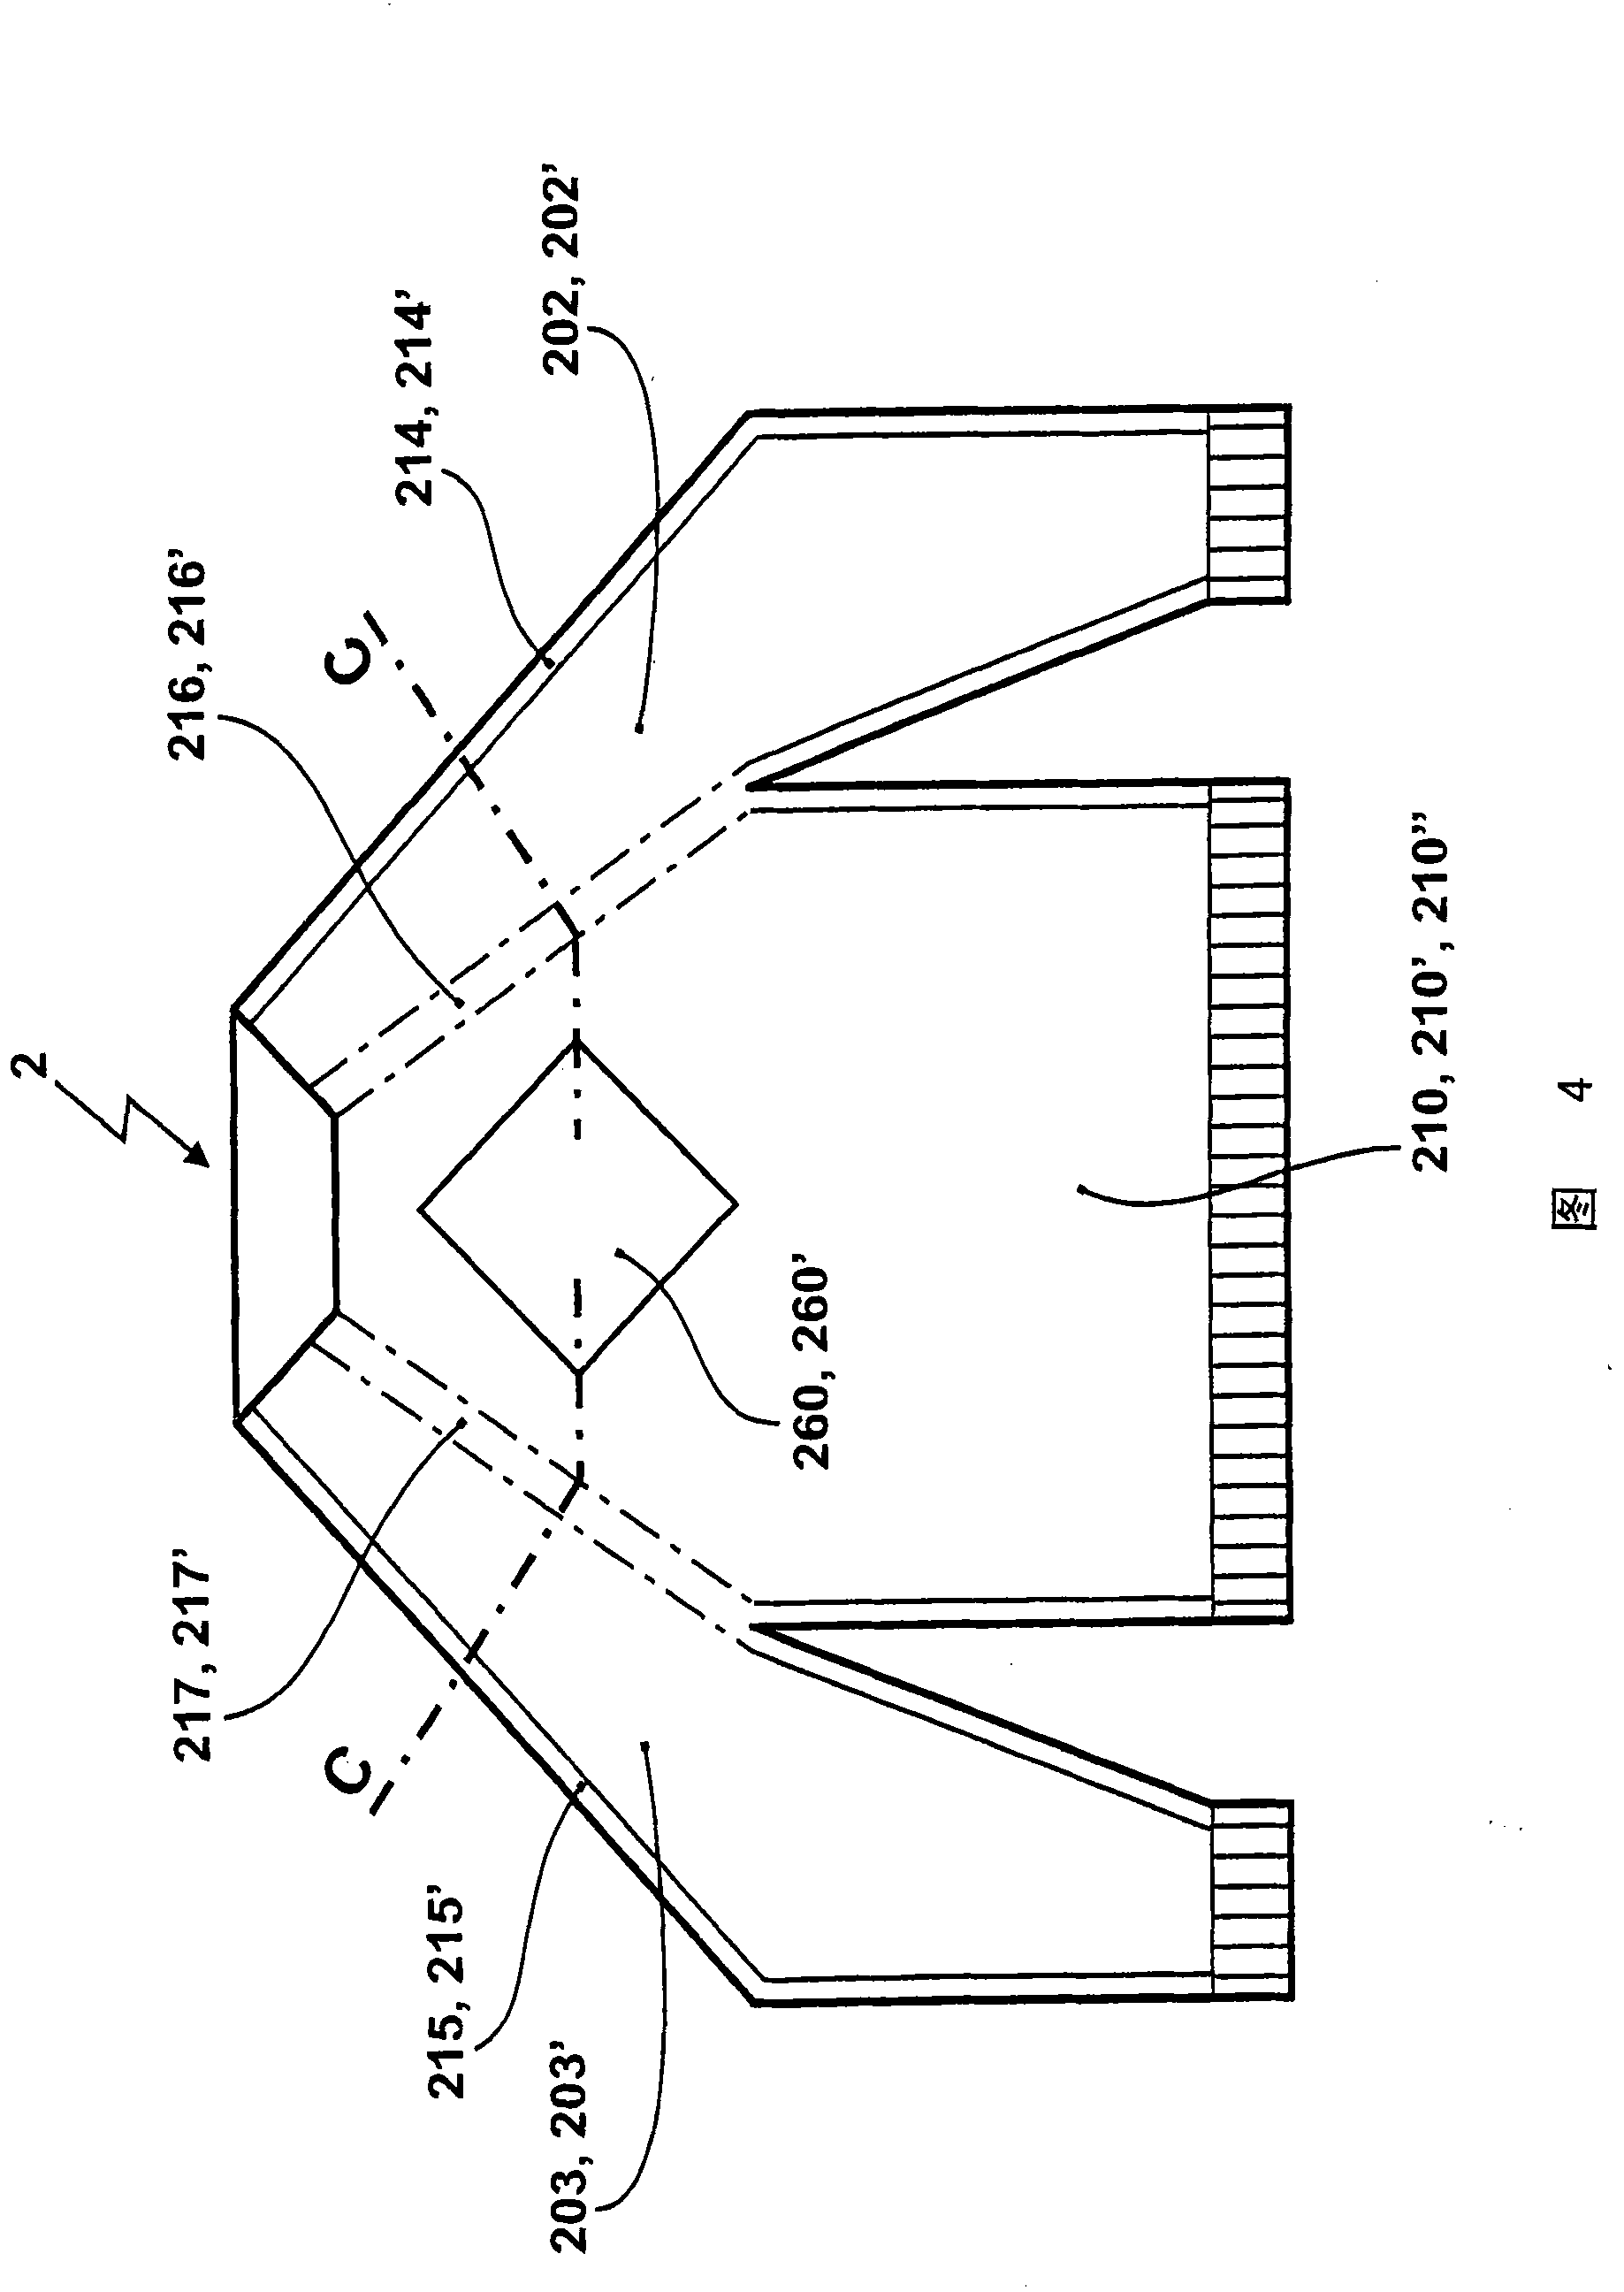 Method for producing a tubular flat knit fabric with the plating technique